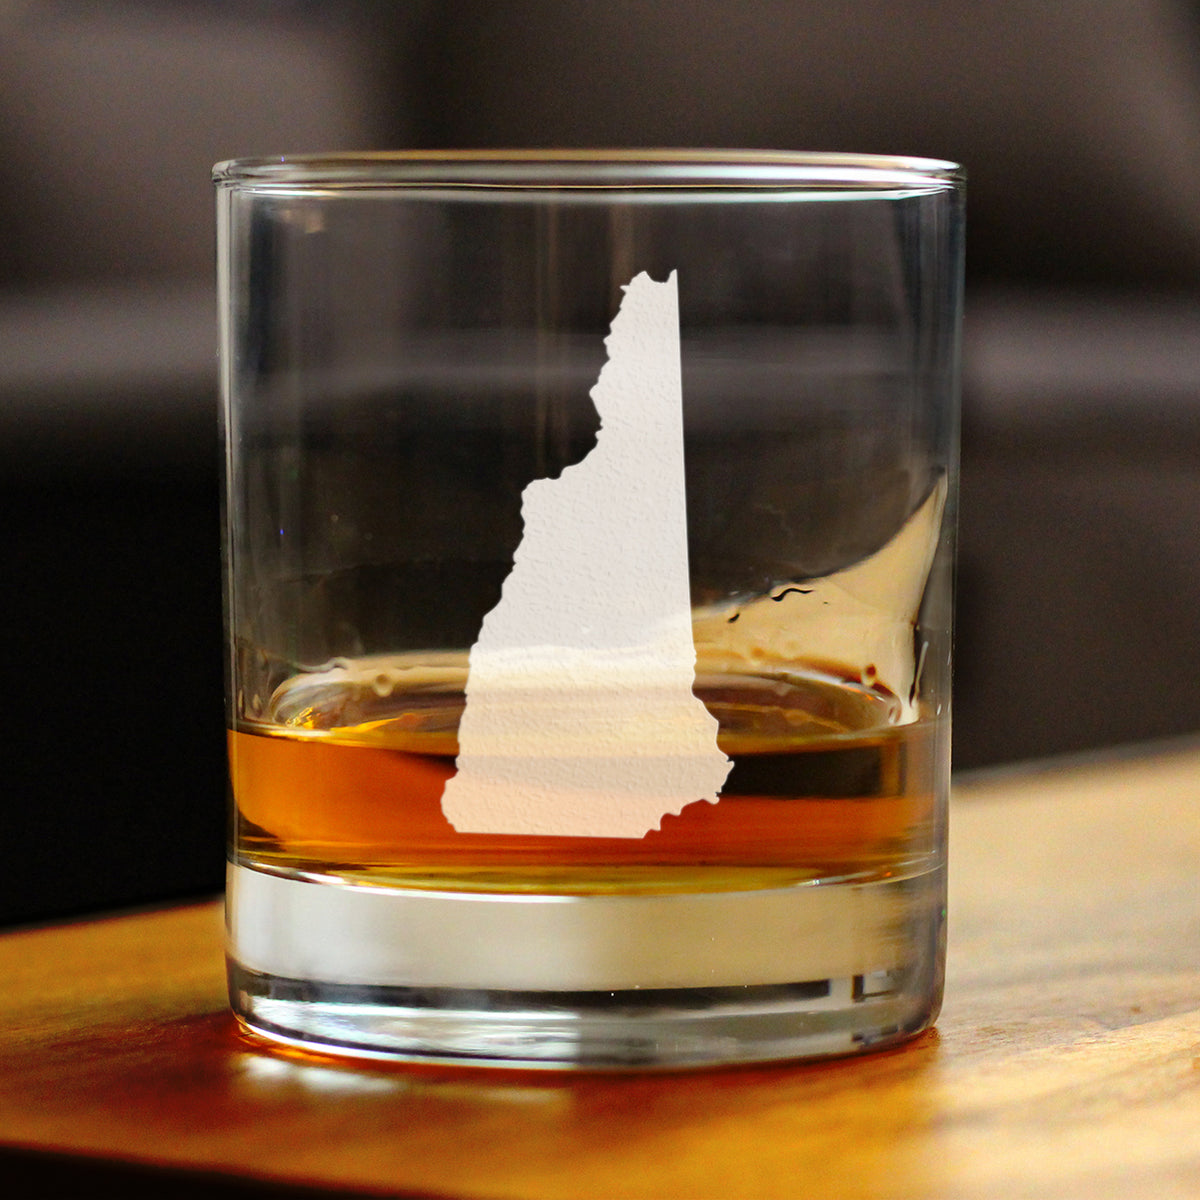 New Hampshire State Outline Whiskey Rocks Glass - State Themed Drinking Decor and Gifts for New Hampshirite Women &amp; Men - 10.25 Oz Whisky Tumbler Glasses